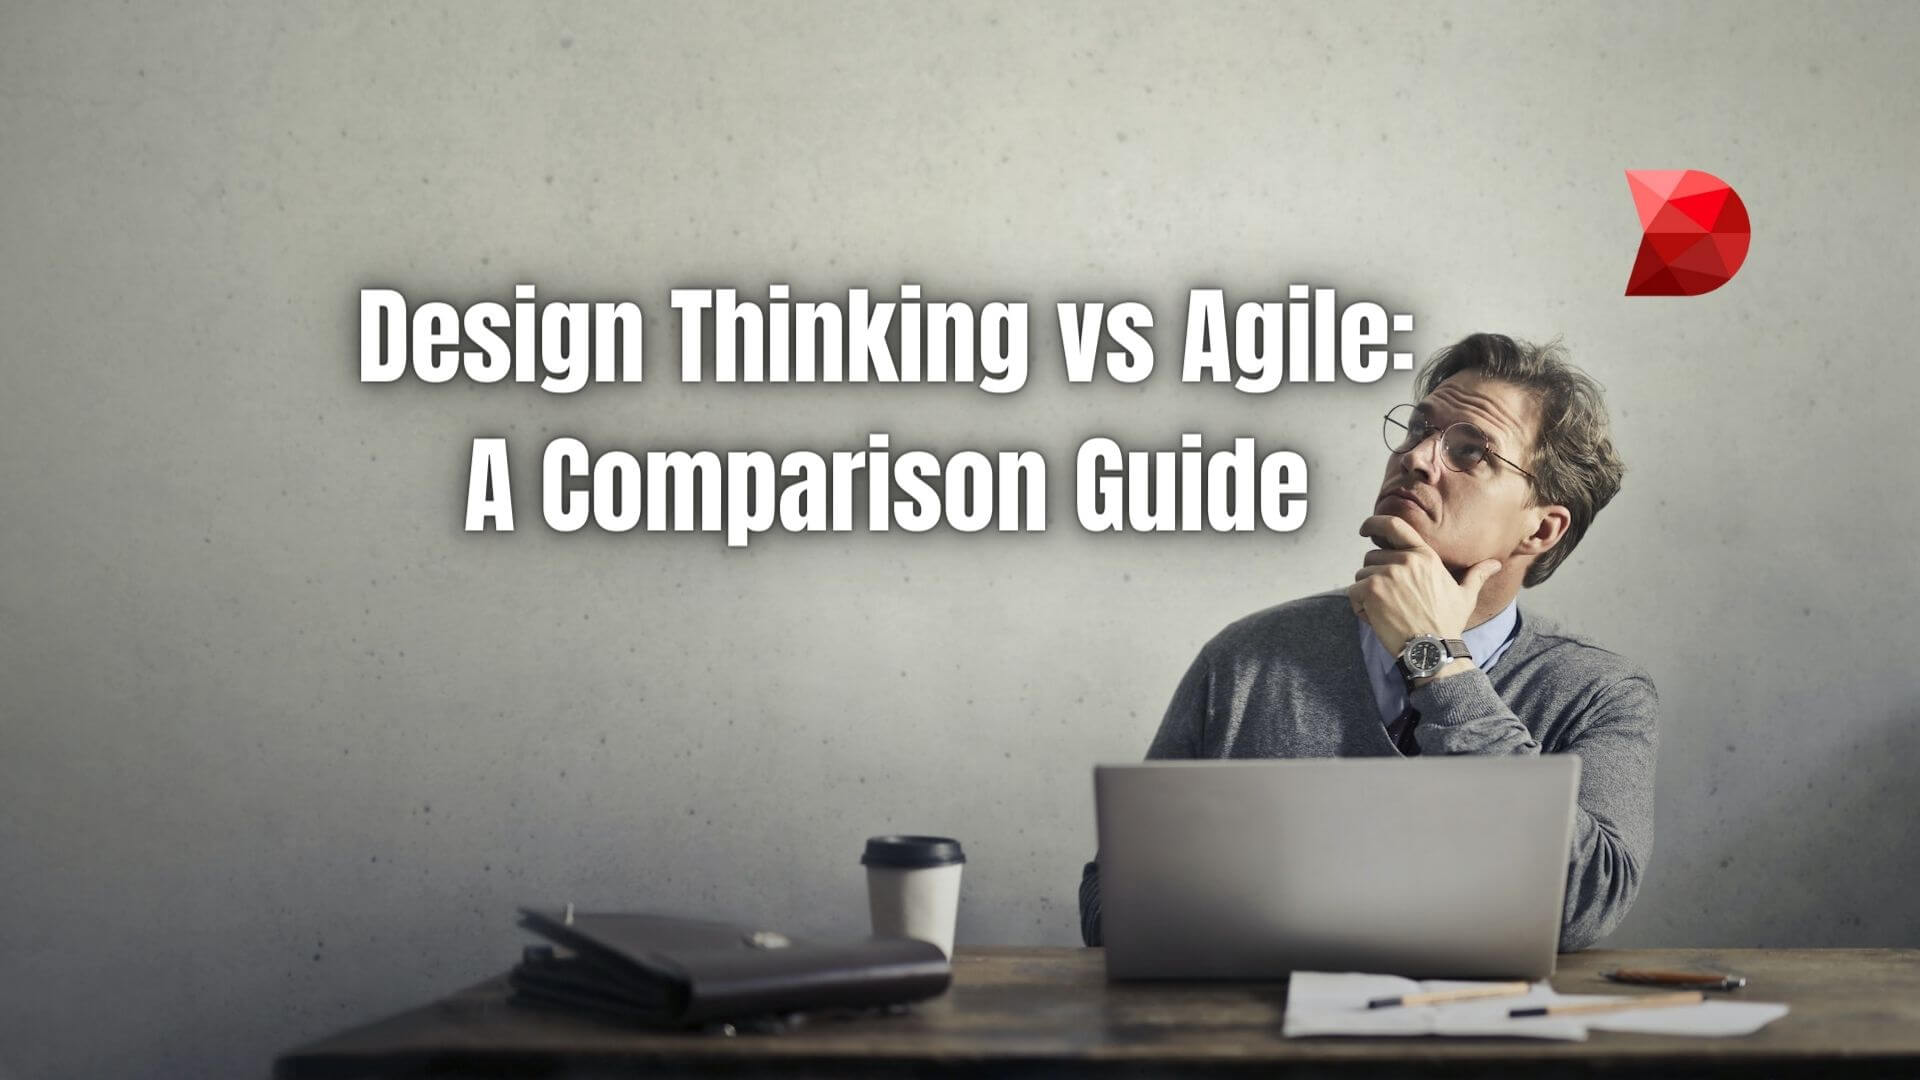 Agile vs. design thinking, an innovative approach combining them is the key to developing robust, user-centered solutions. Learn more!